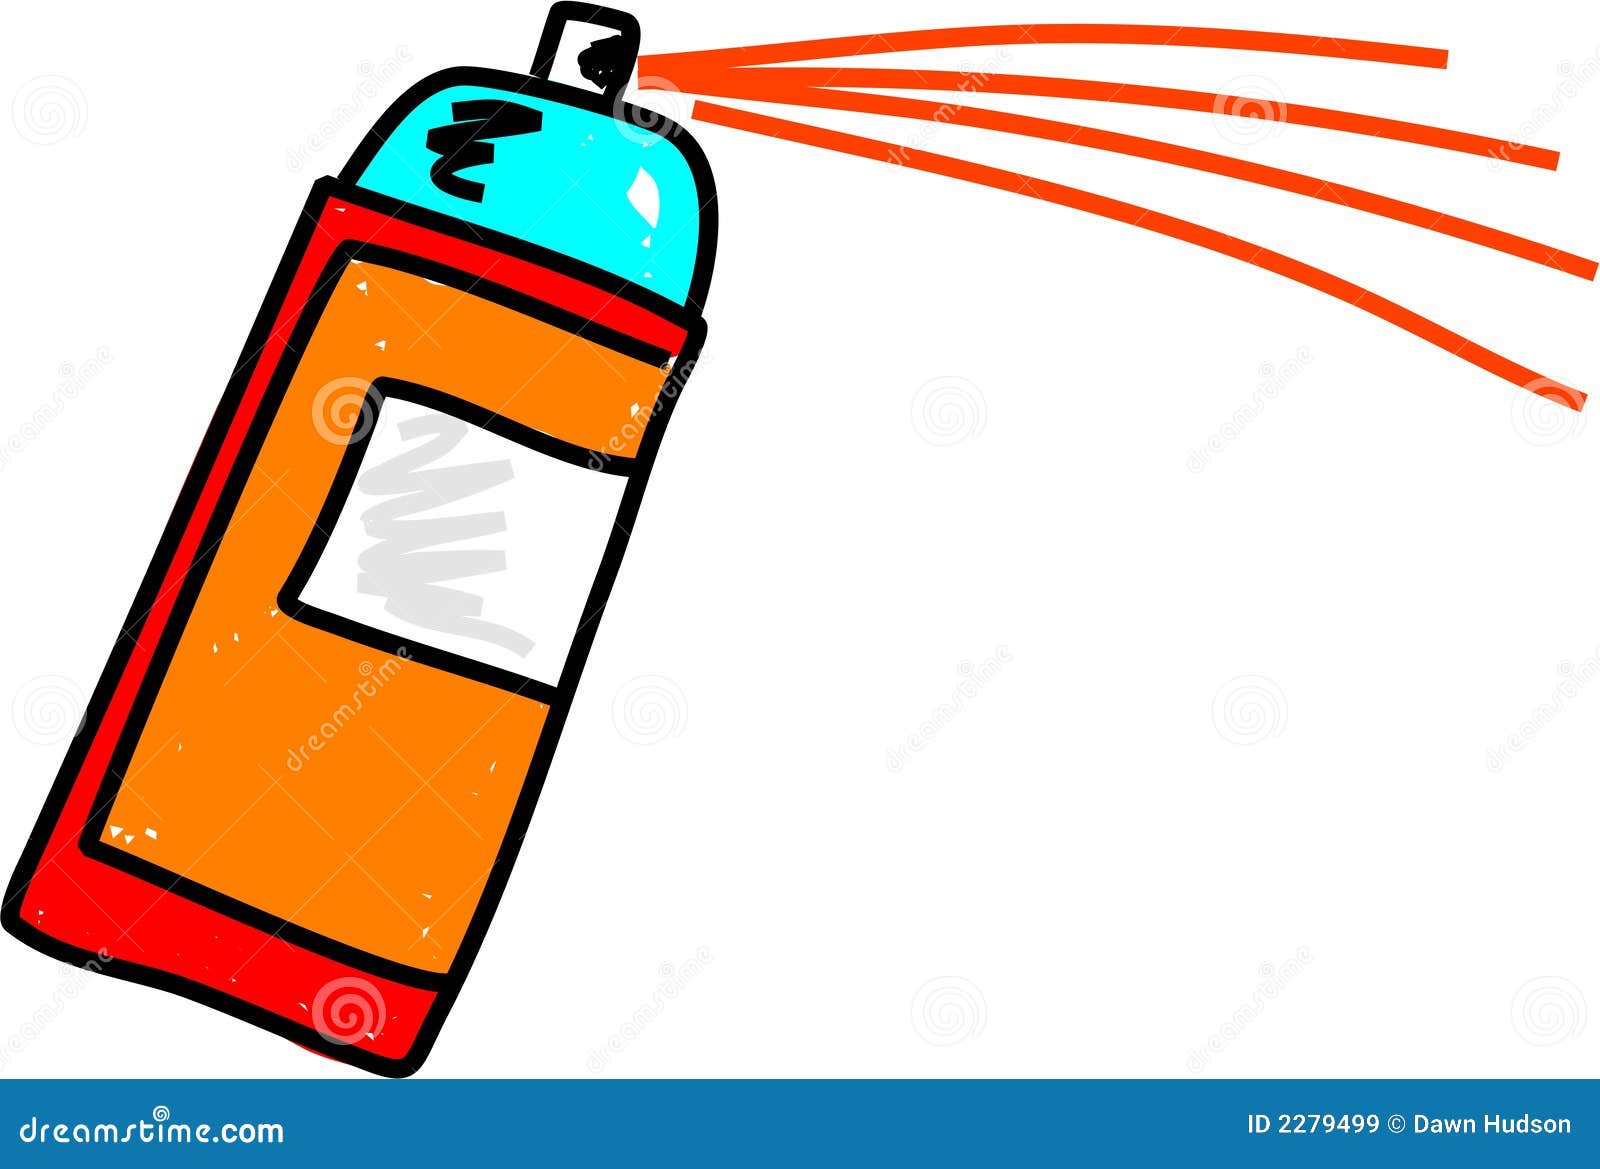 Spray can stock vector. Illustration of clip, everyday - 2279499